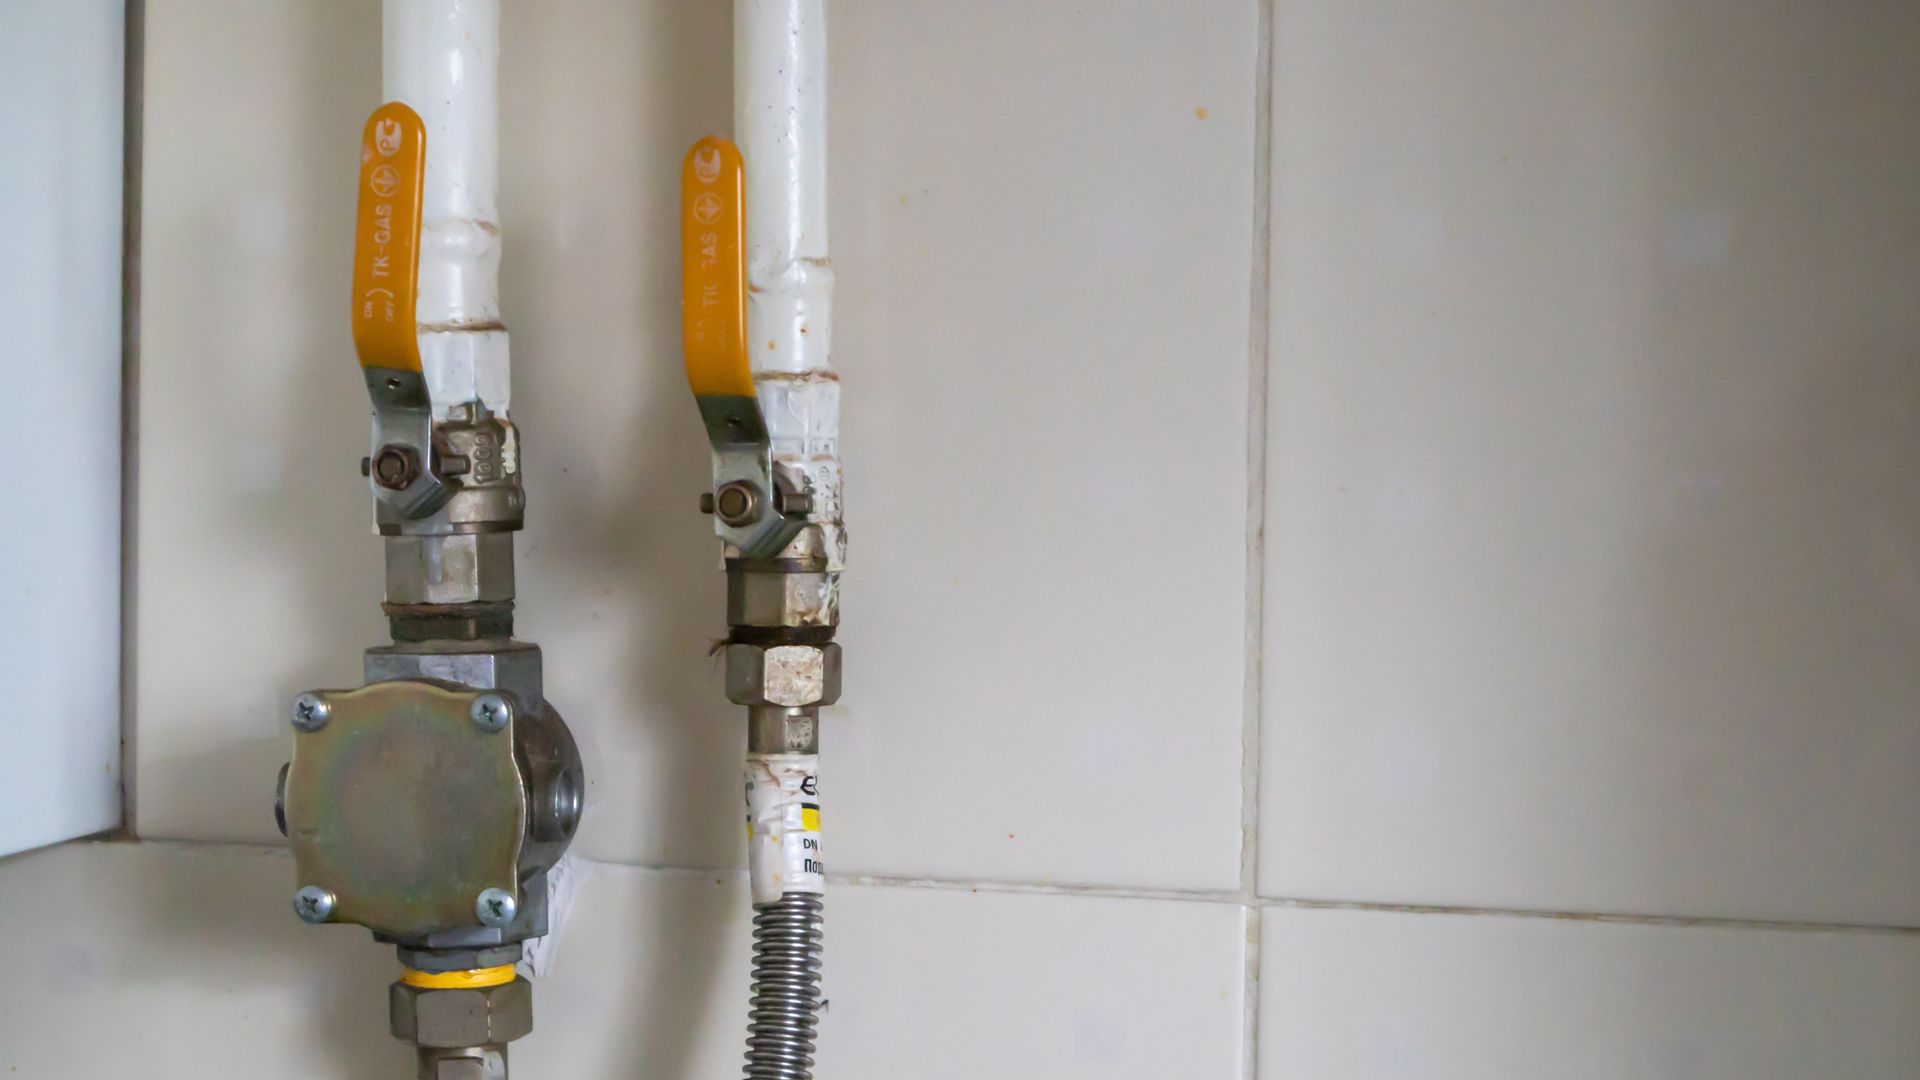 Yellow valves and natural gas pipes in a modern home boiler room in a kitchen with ceramic tiles